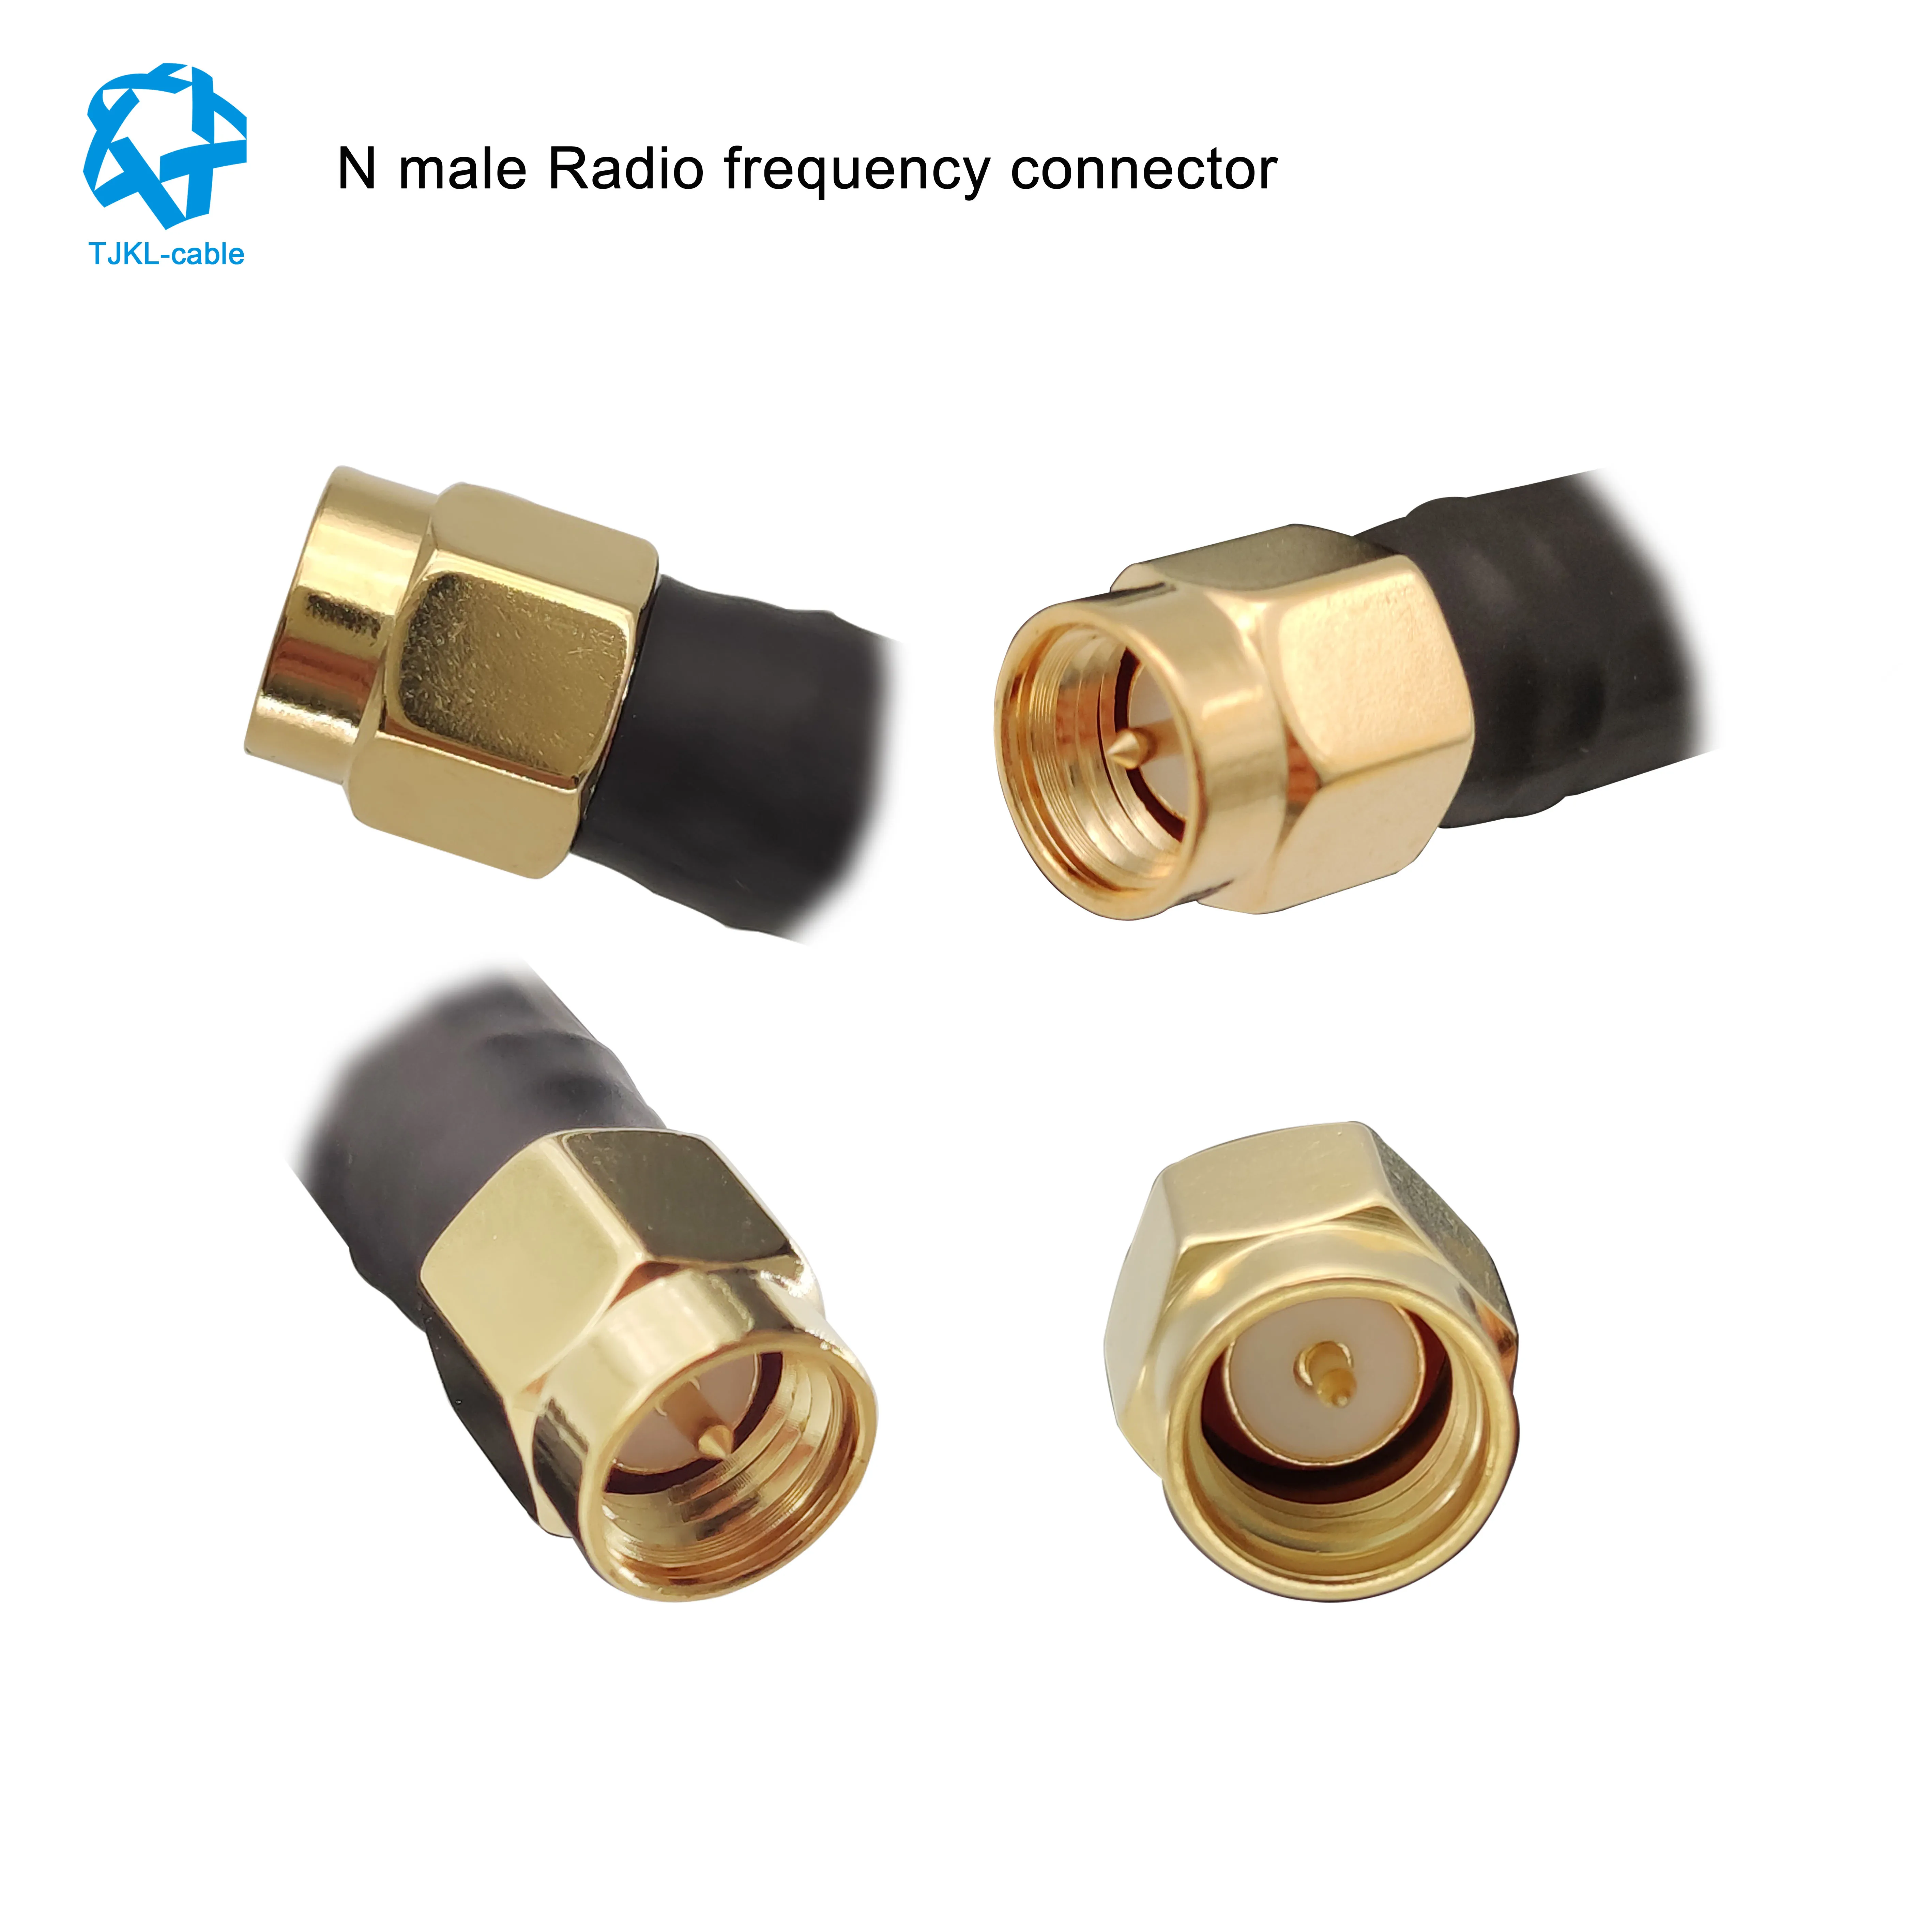 
lmr240 50Ohm rf coaxial cable N male sma male lower loss cable LMR400 LMR200 LMR195 LMR100 lmr series customized 